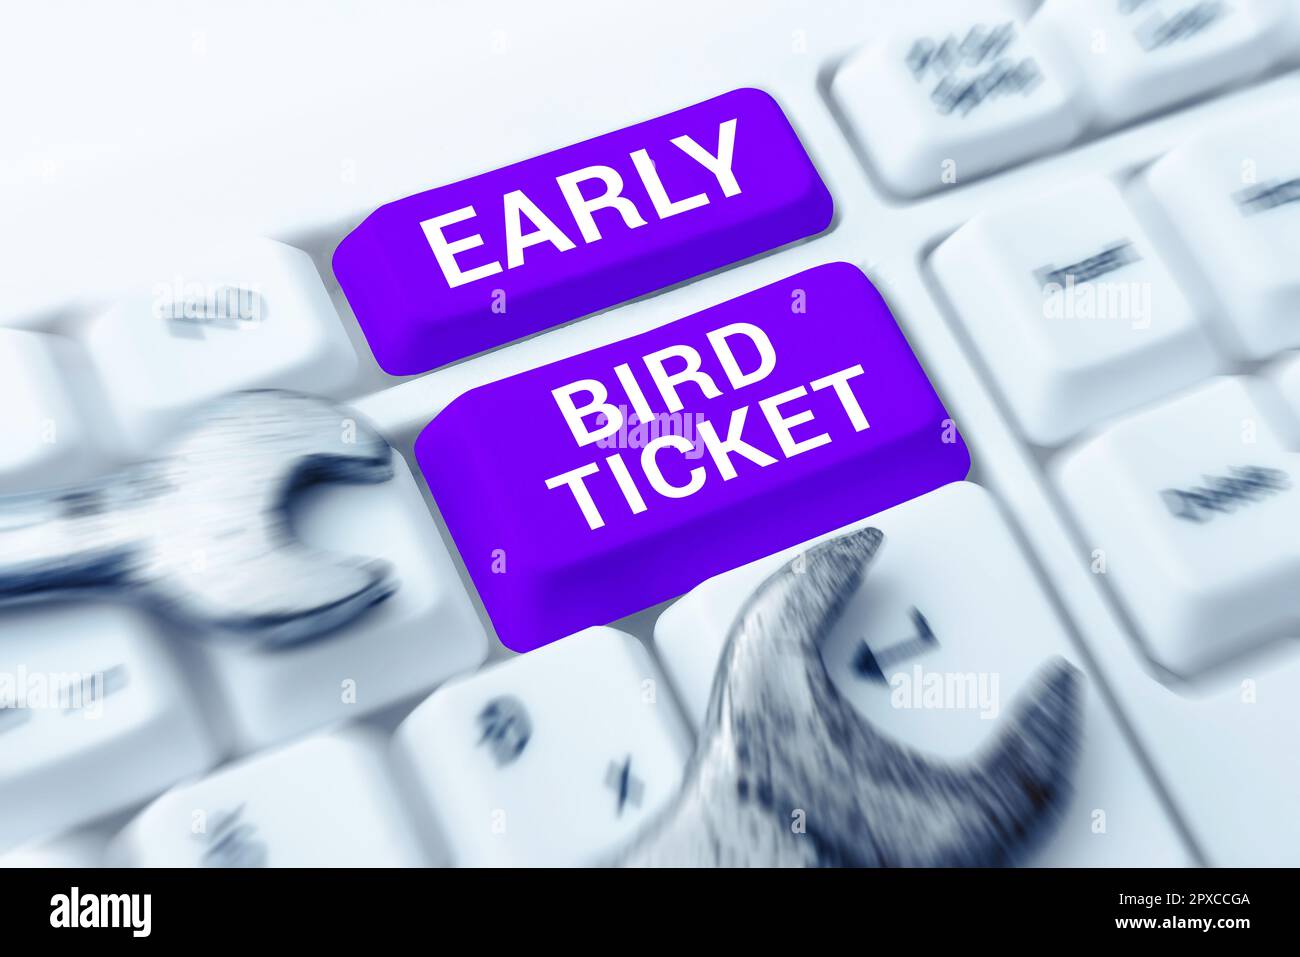 conceptual-caption-early-bird-ticket-concept-meaning-buying-a-ticket